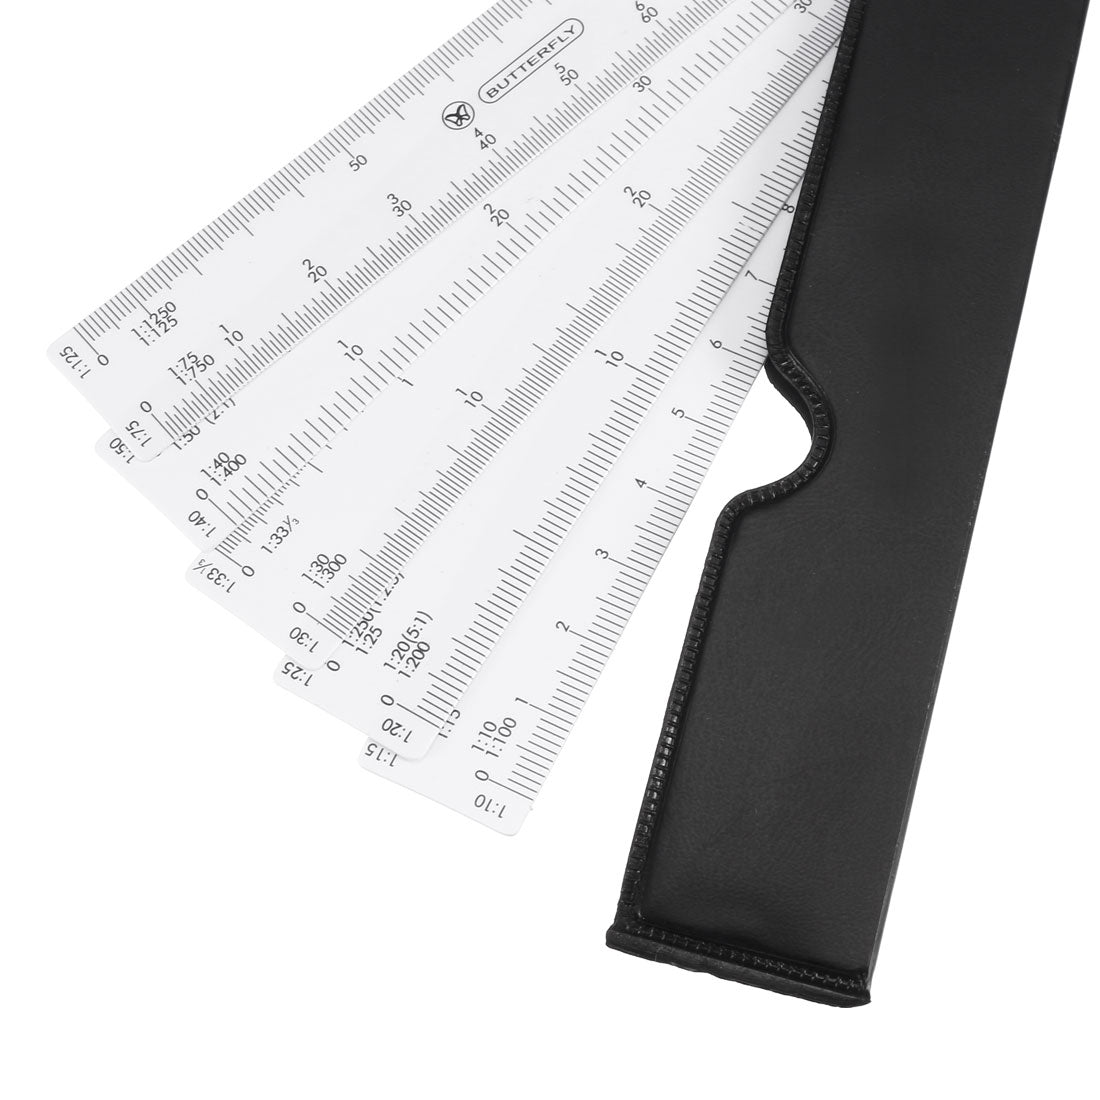 uxcell Uxcell Scale Ruler Engineer Scale Architect Rulers 1/10 1/15 1/20 1/25 1/30 1/33 1/40 1/50 1/75 1/125 Plastic